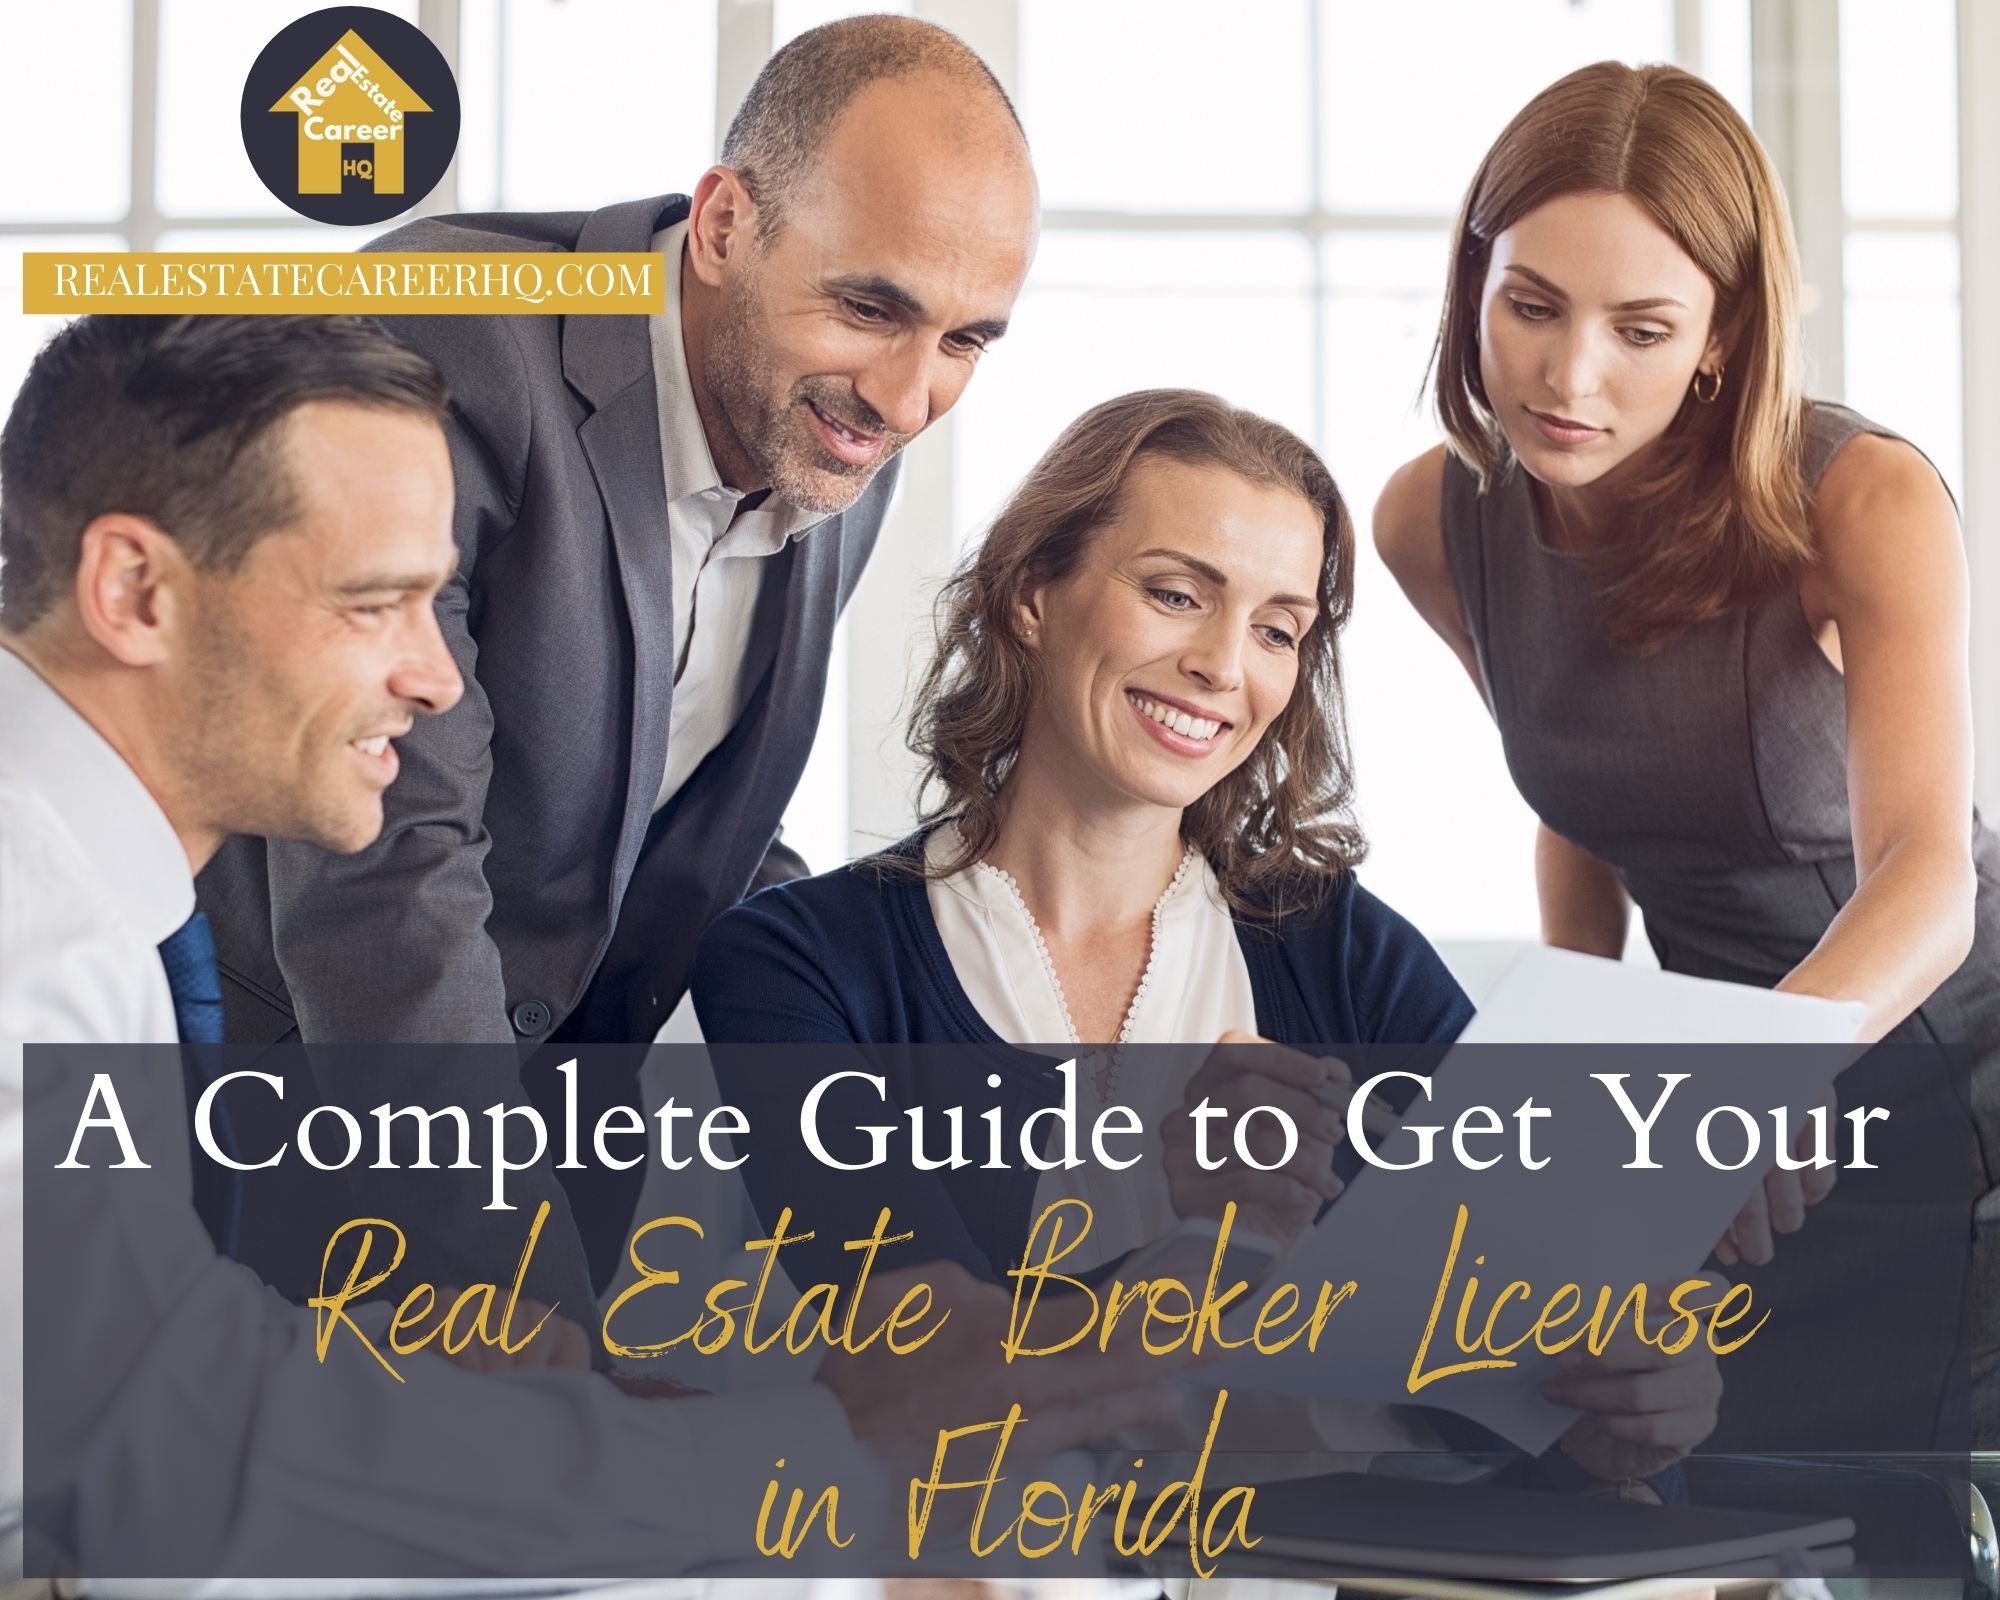 How to Become a Real Estate Broker in Florida? - Real Estate Career HQ